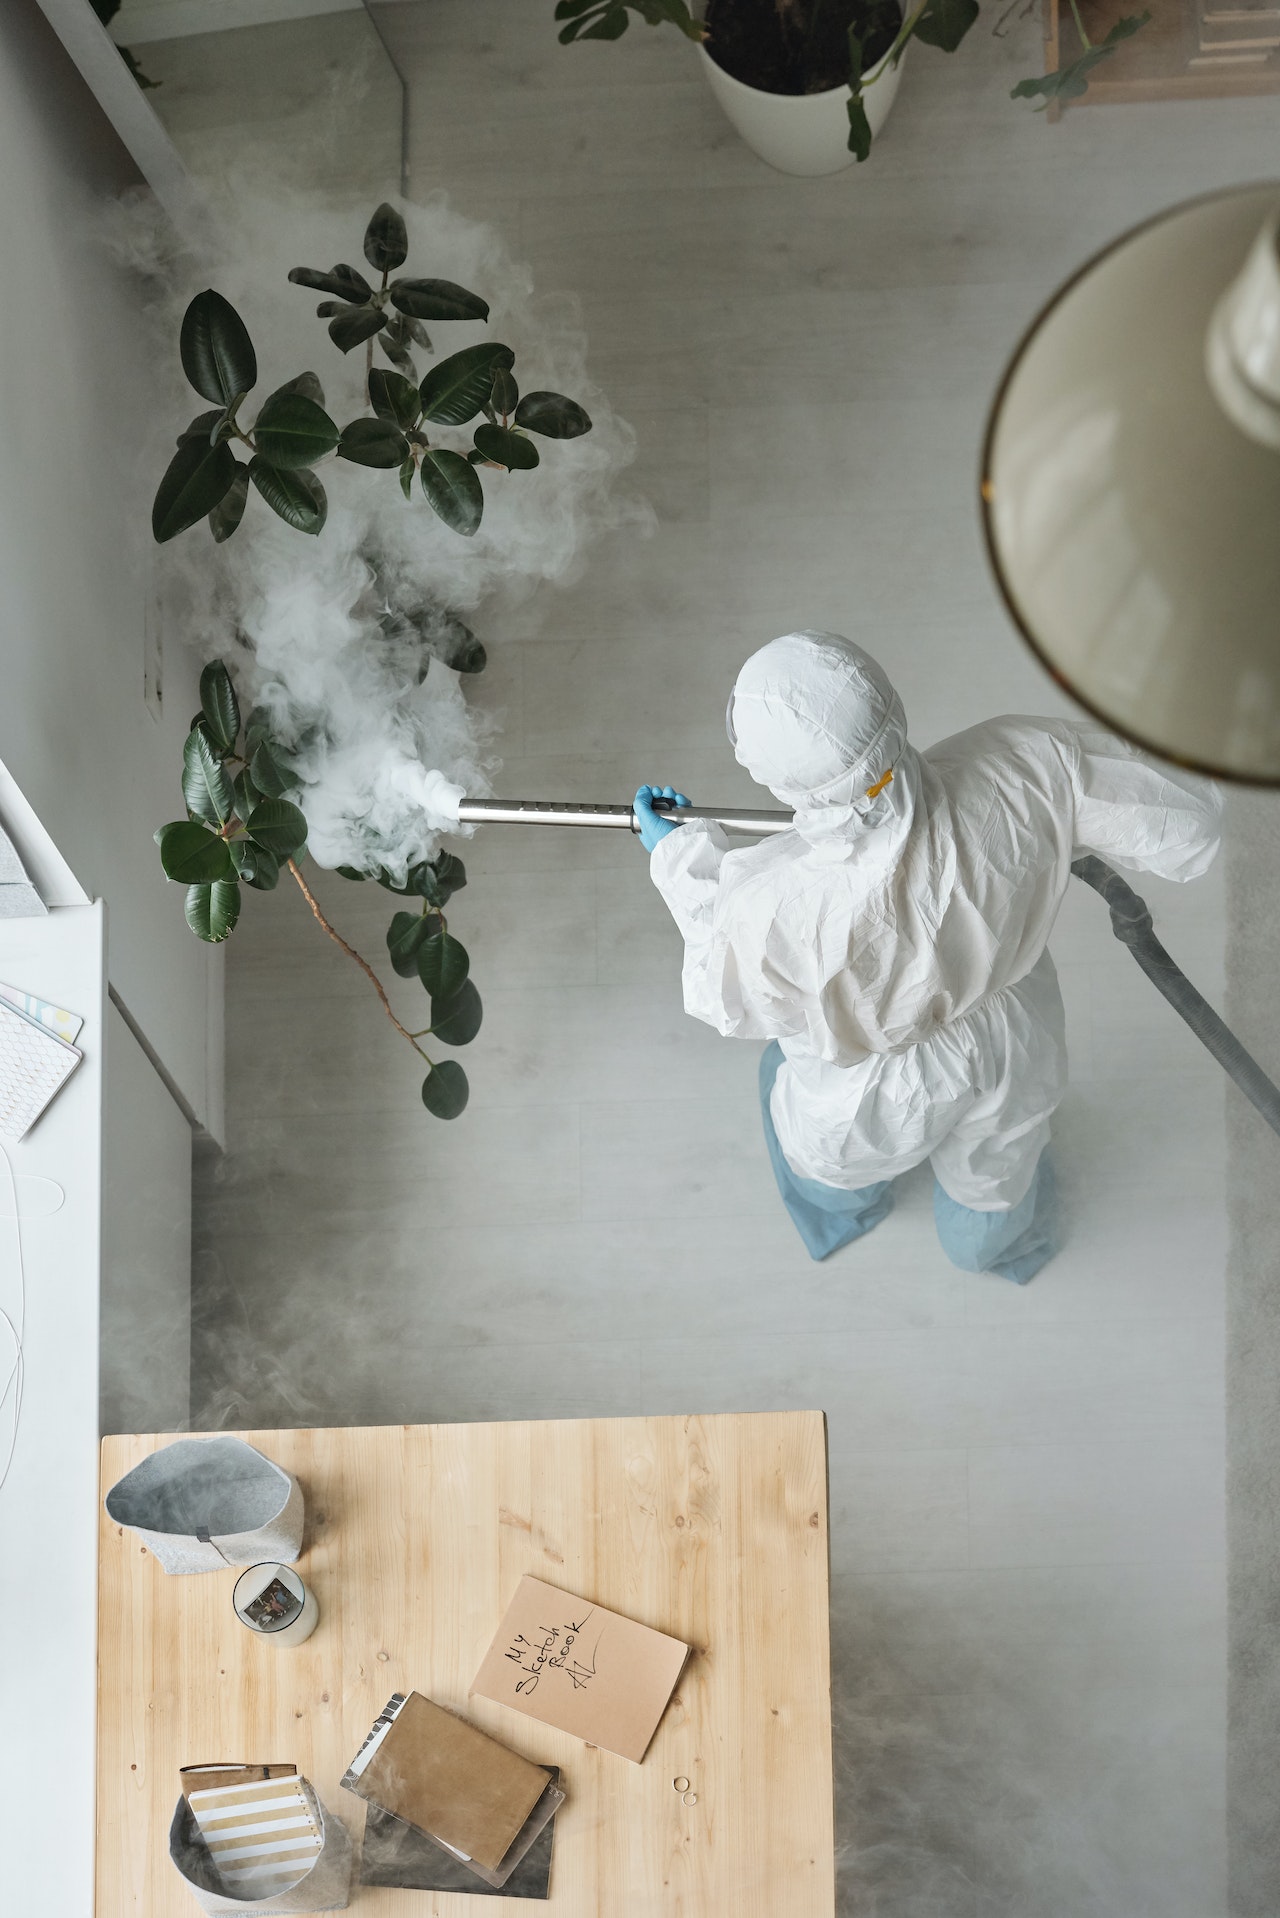 Fumigation & Pest Control in Ghana: Everything You Need to Know